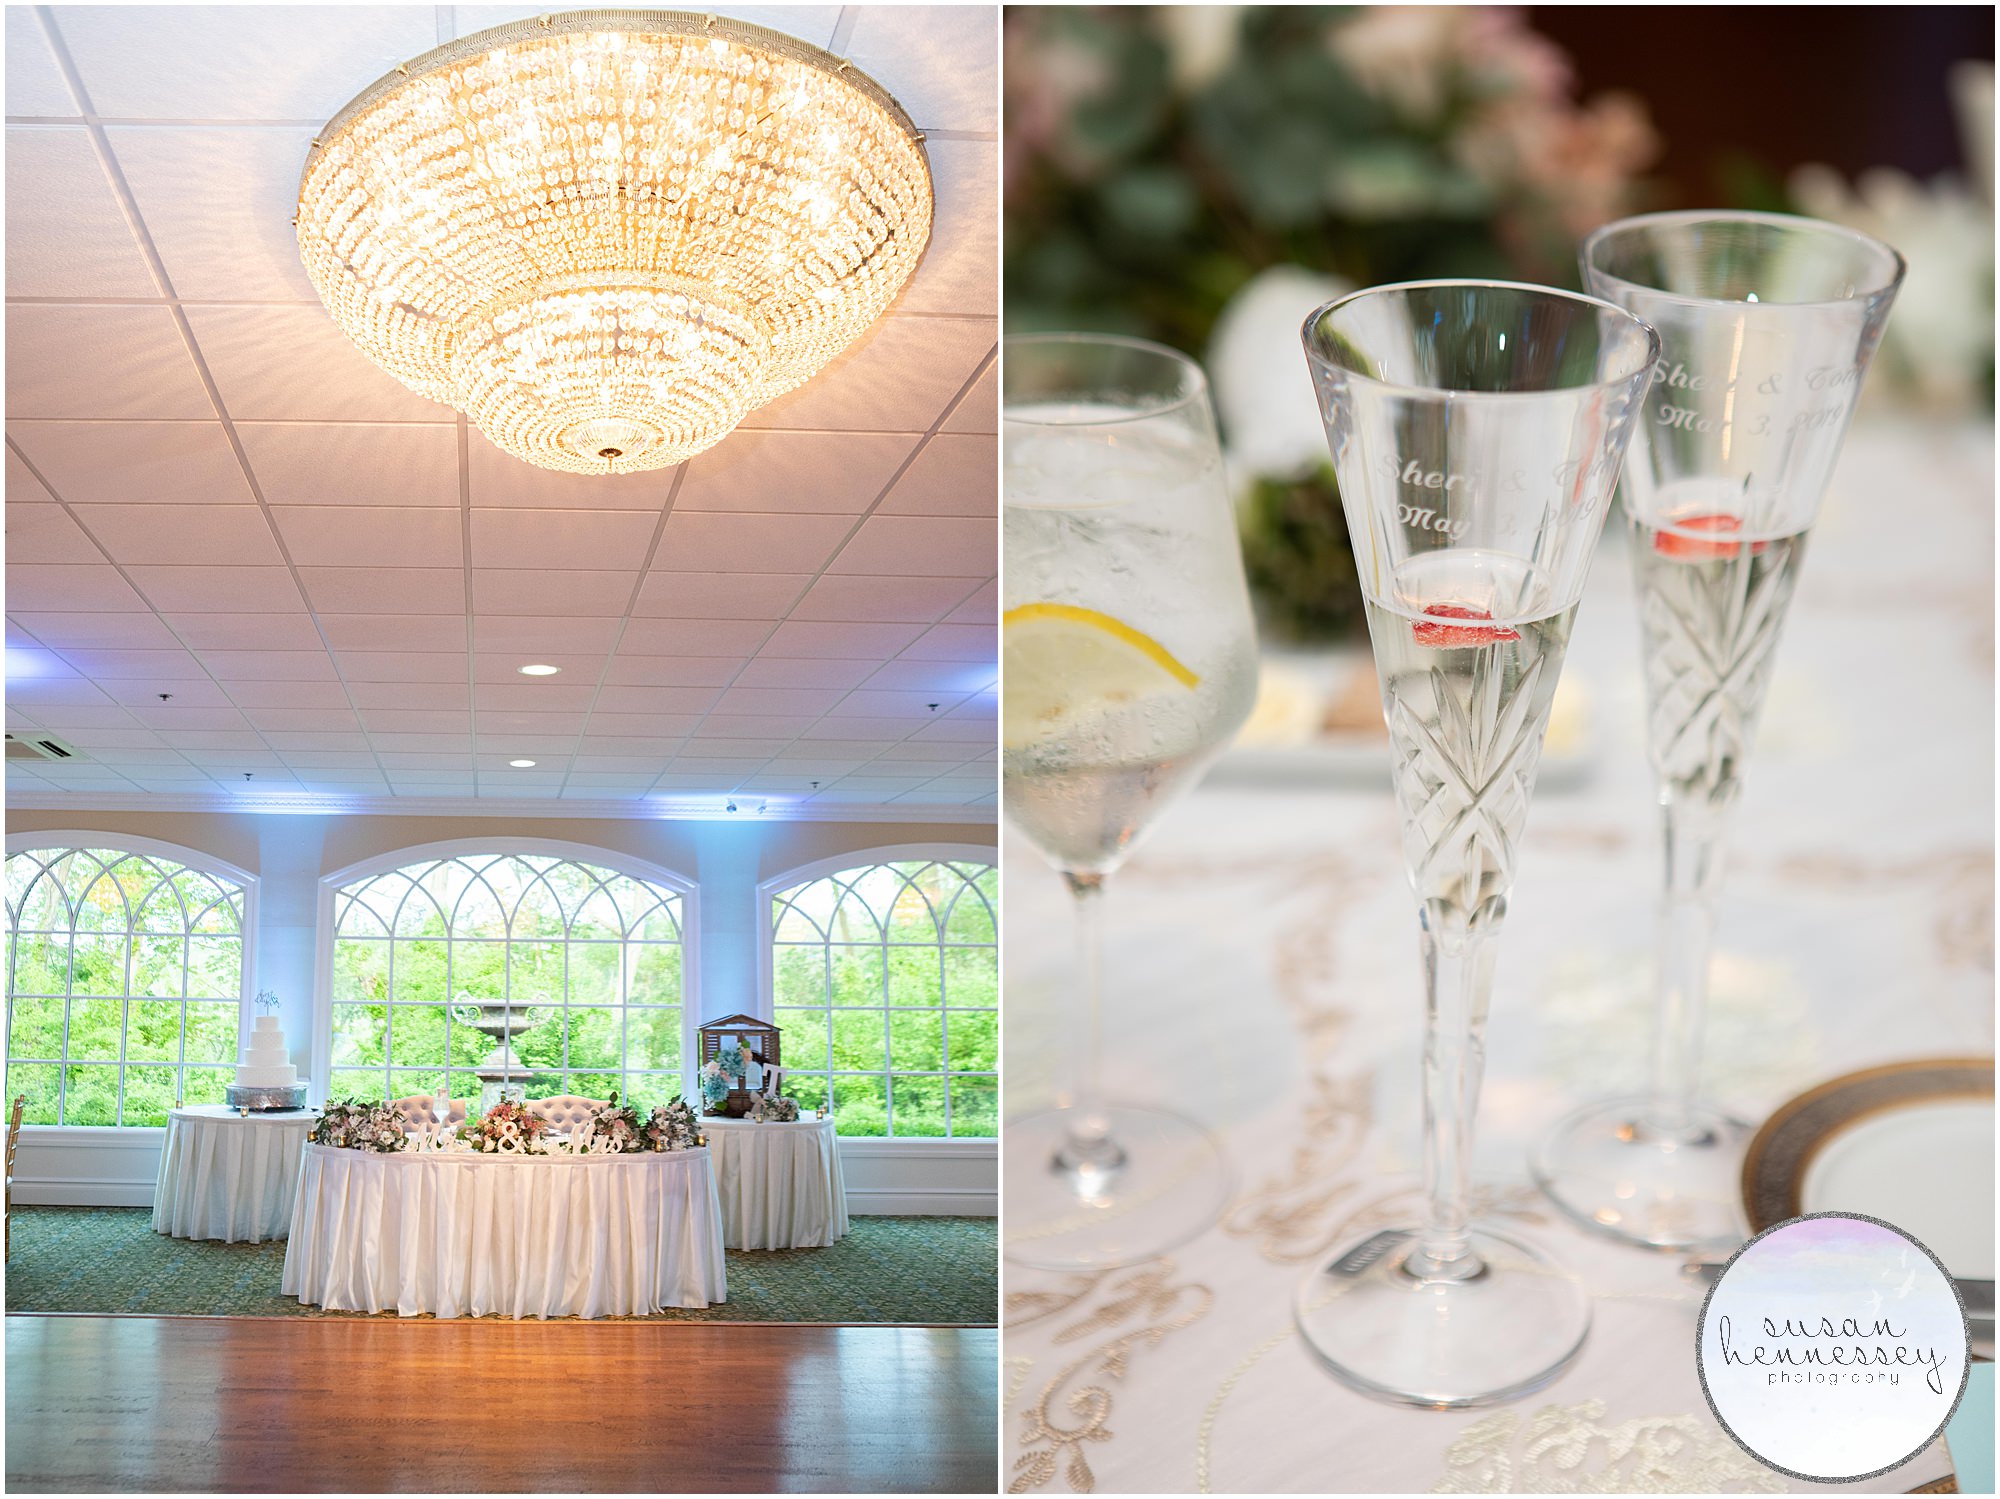 Details of the sweetheart table and custom champagne flutes